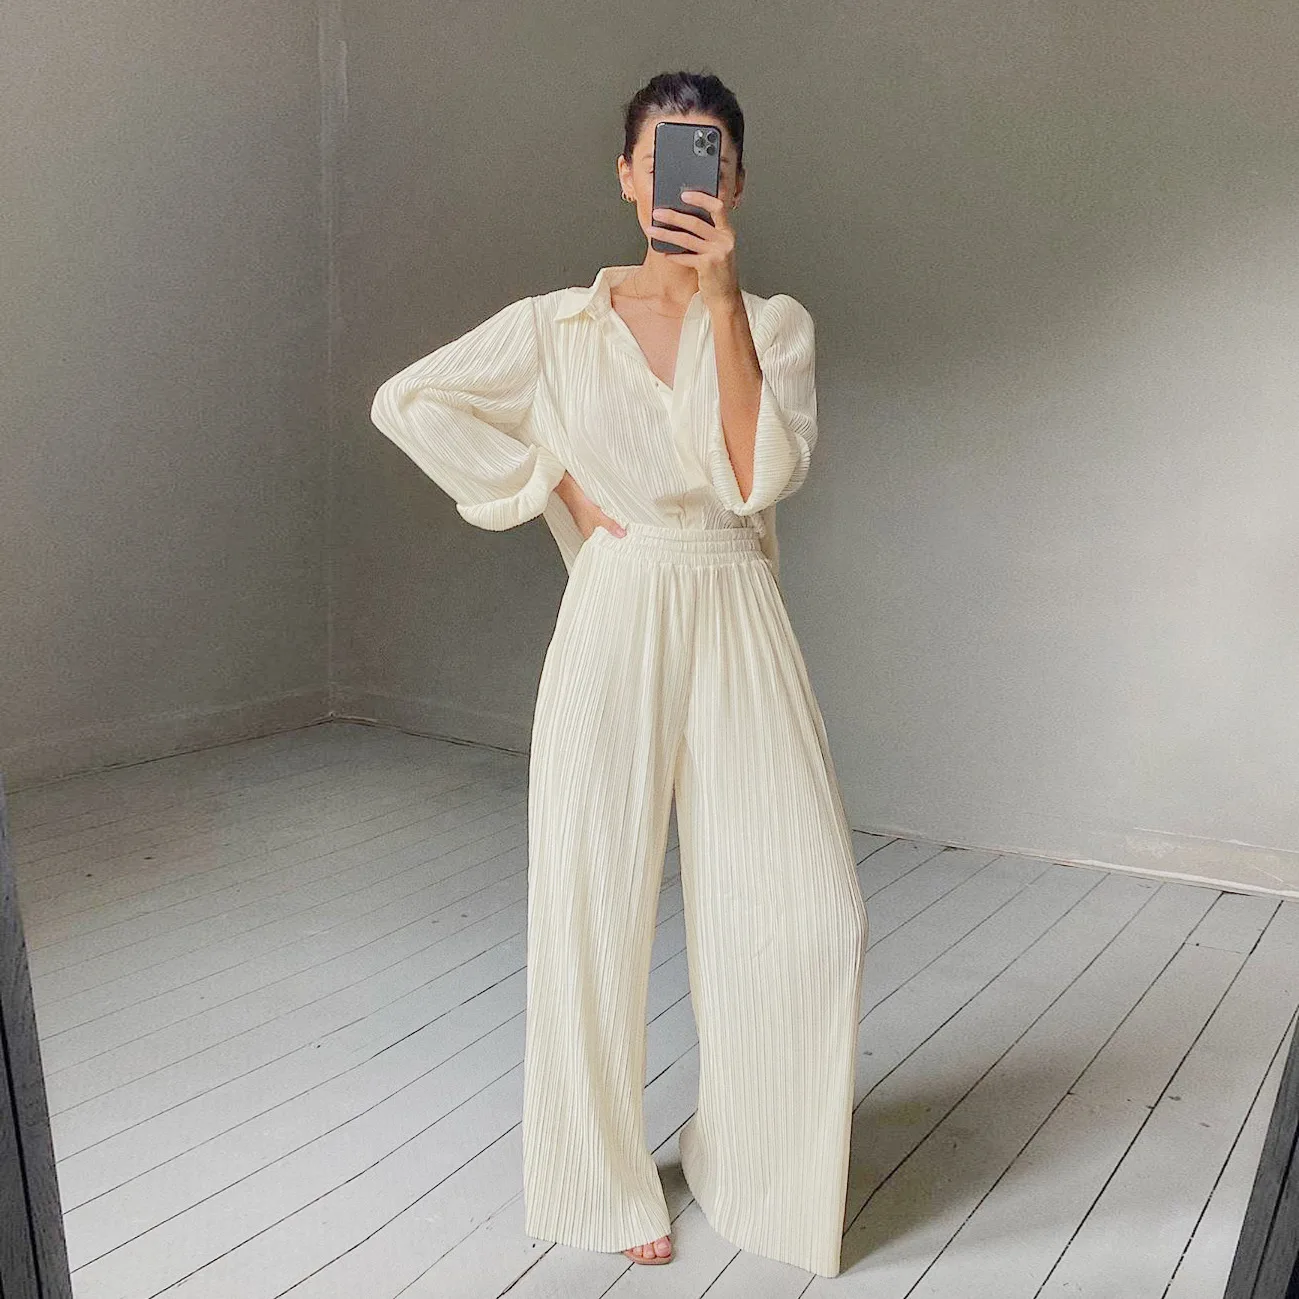 Khaki Pleated Wide Leg Pants Women Trousers Elegant Casual Palazzo Pants Elastic High Waist Ruched Oversized Pants Ladies buttoned wide waistband palazzo pants with strap